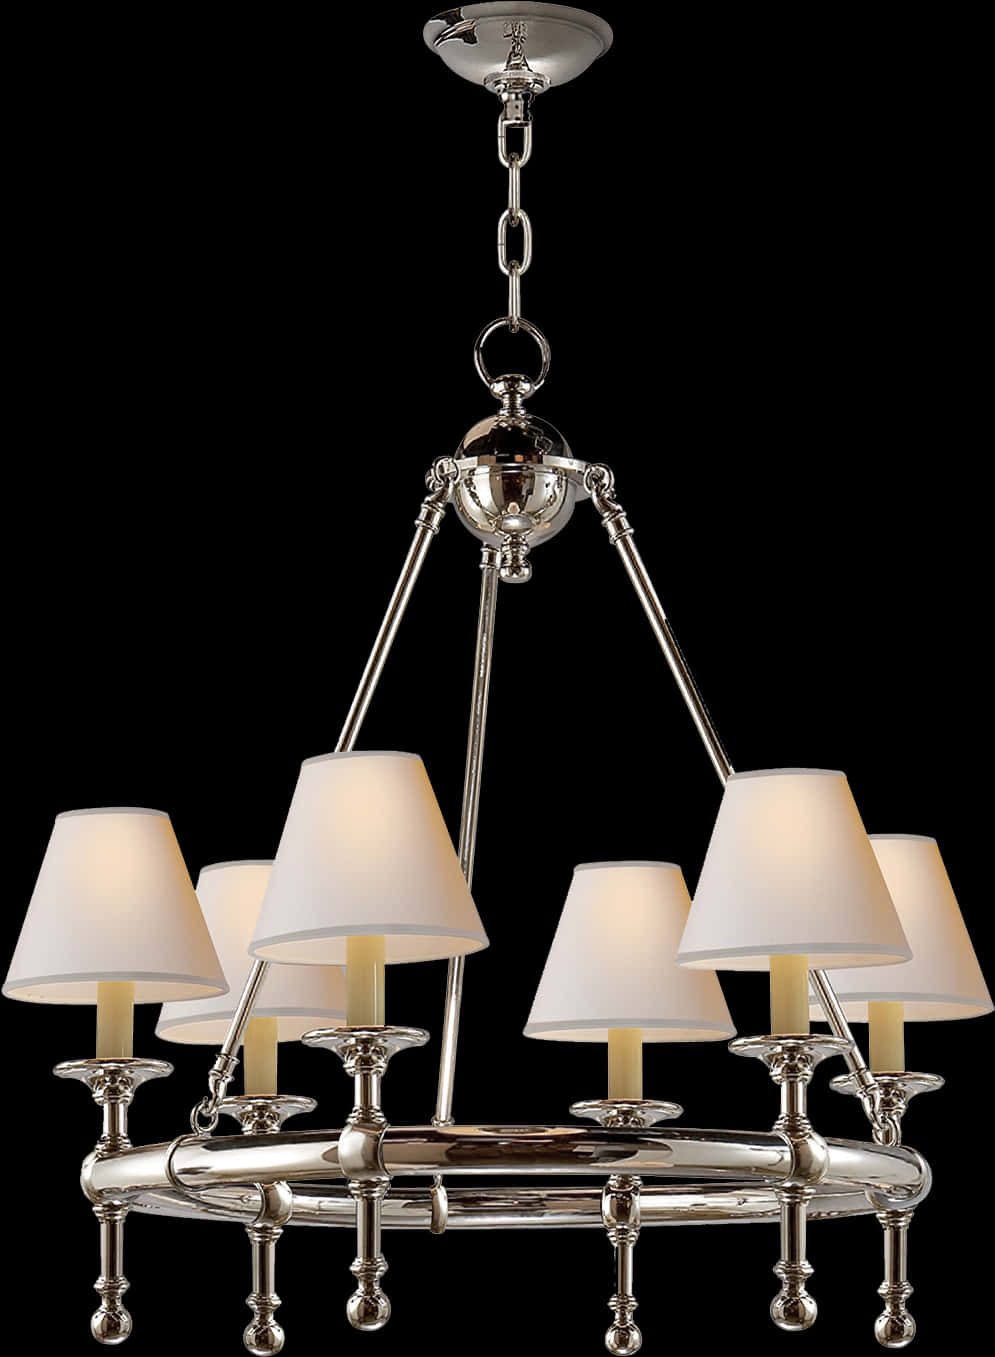 Elegant Silver Chandelierwith Shades.jpg PNG